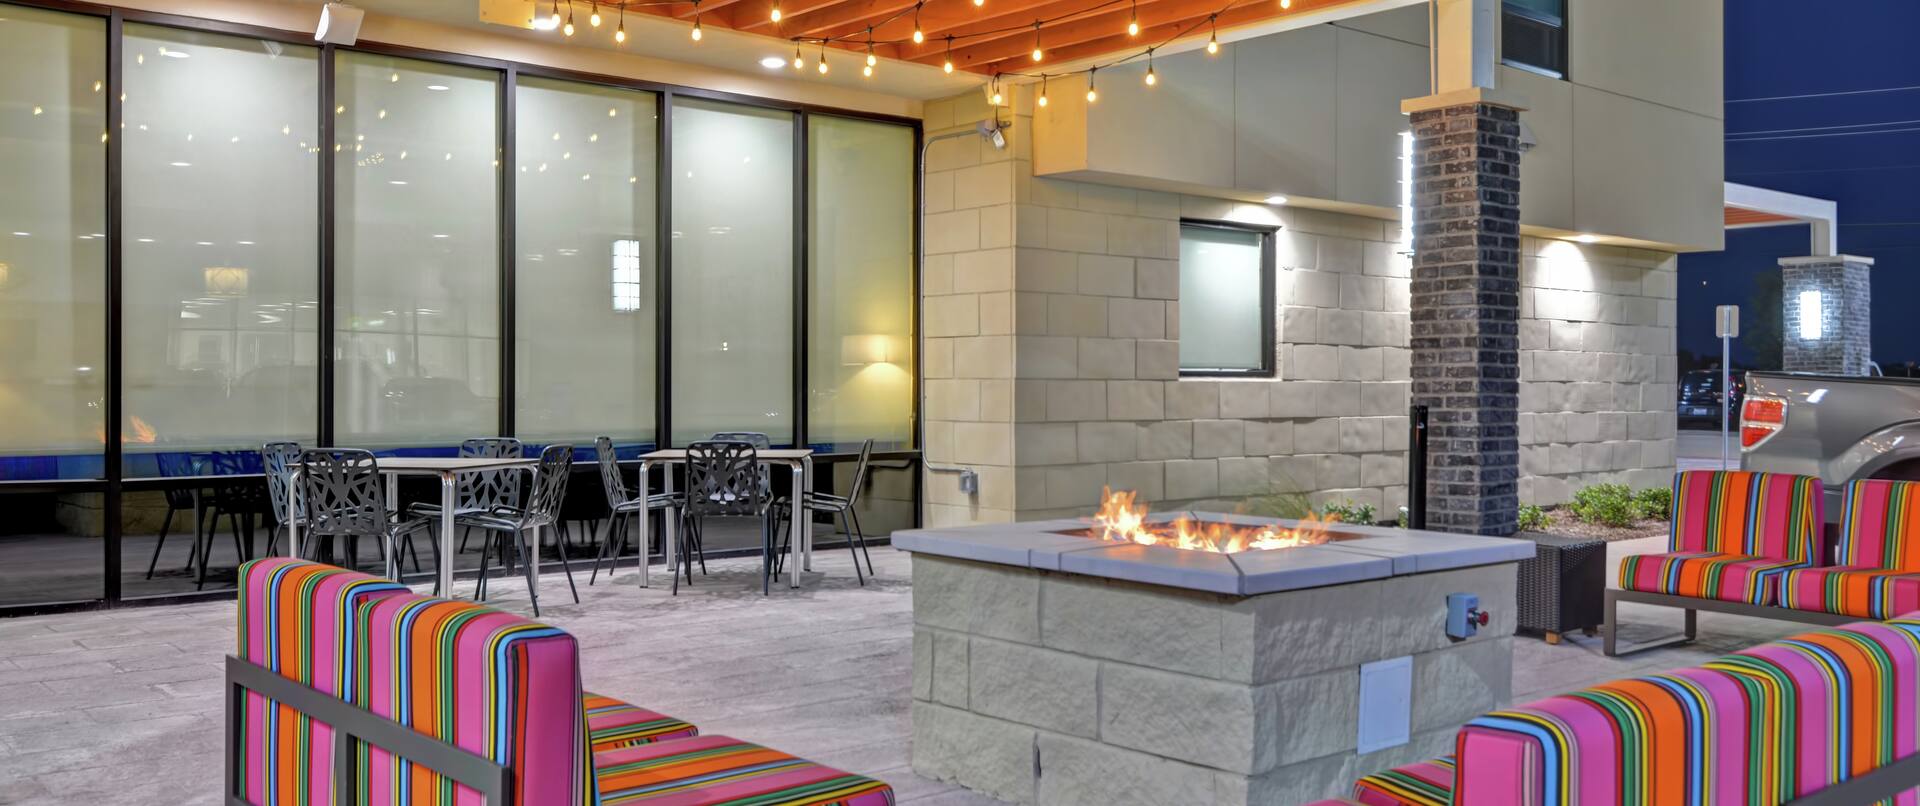 Outdoor patio area with firepit